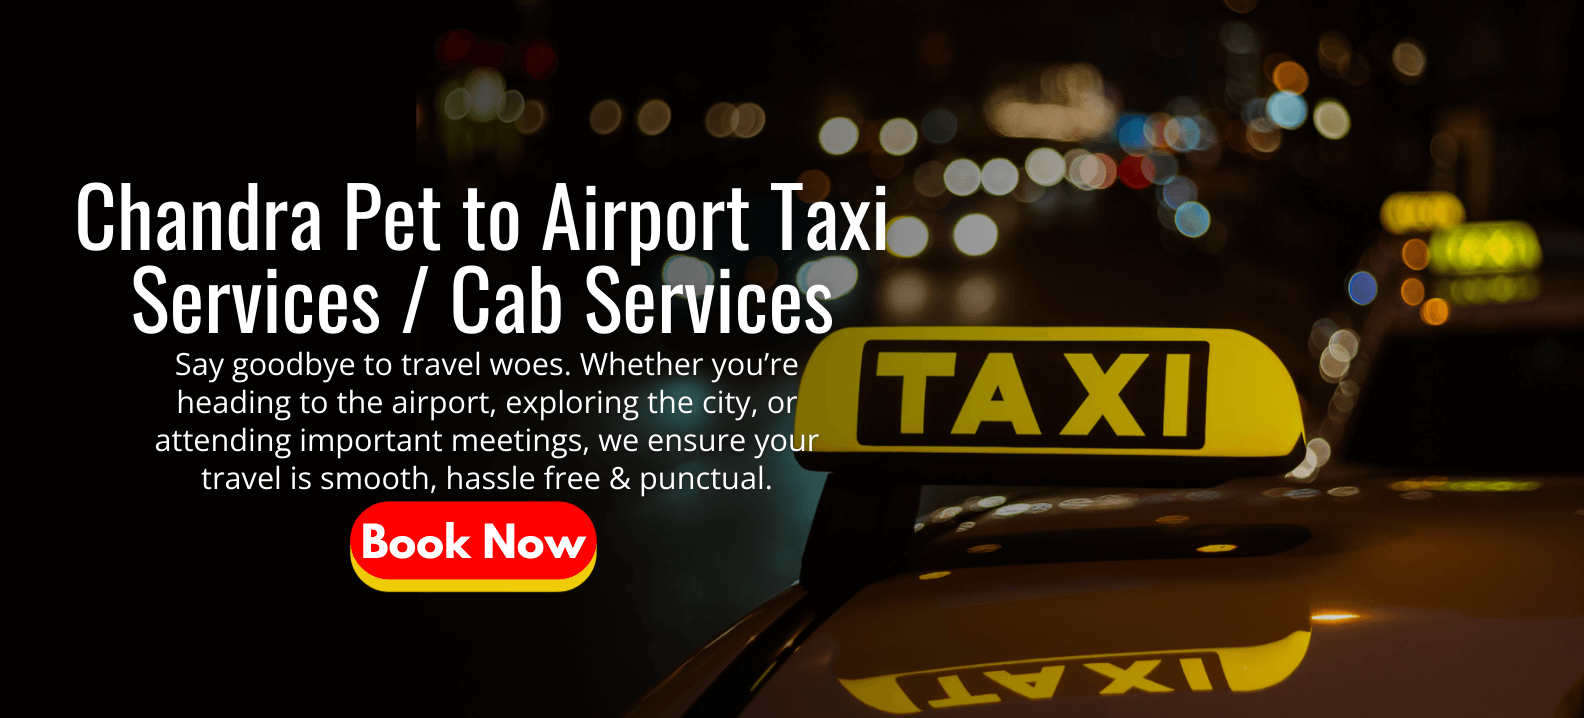 Chandra Pet to Airport Taxi Services Cab Services